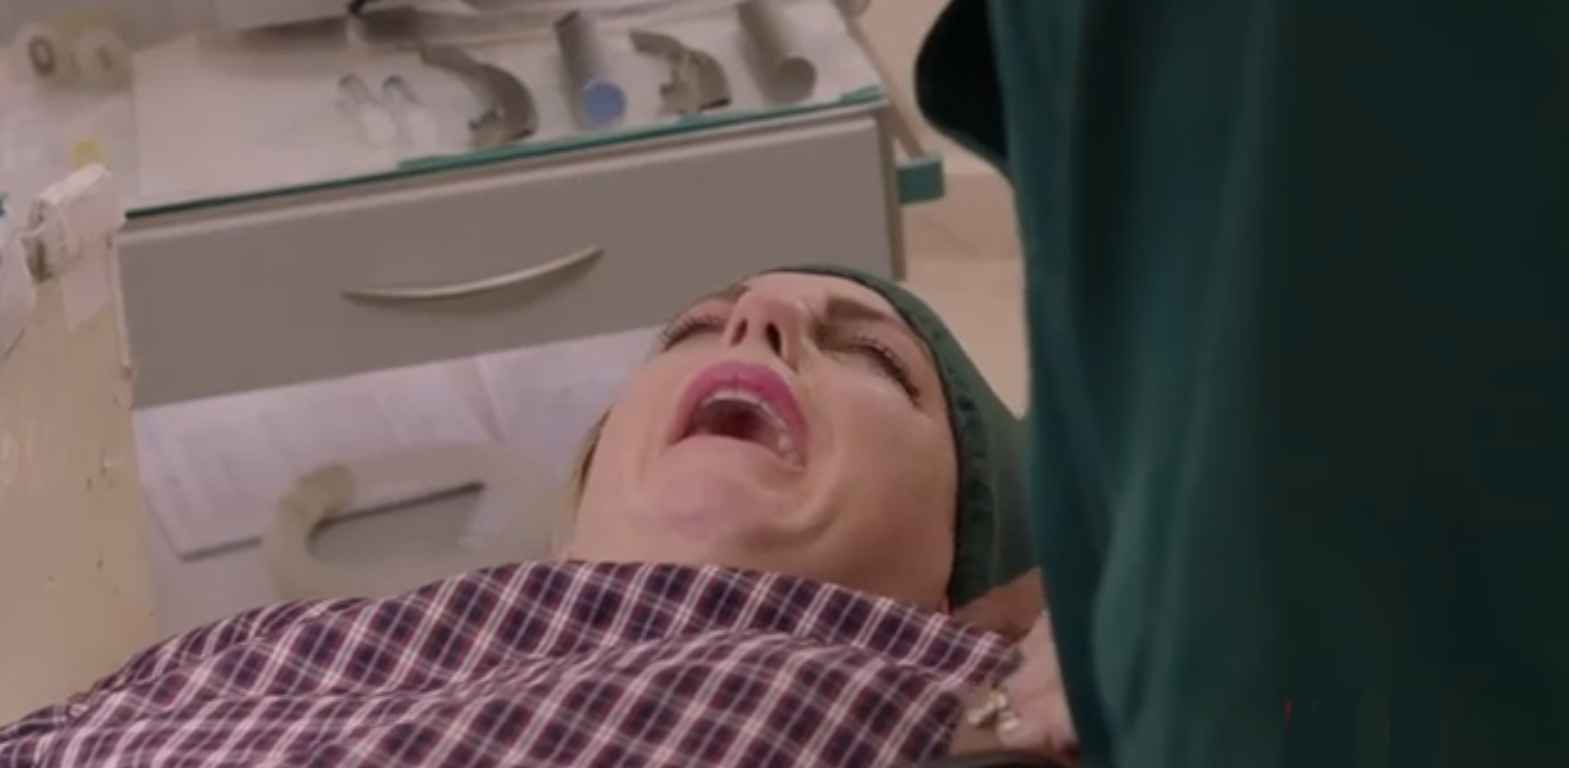 Ariela gives birth to Biniyam's baby by C-section on 90 Day Fiance: The Other Way